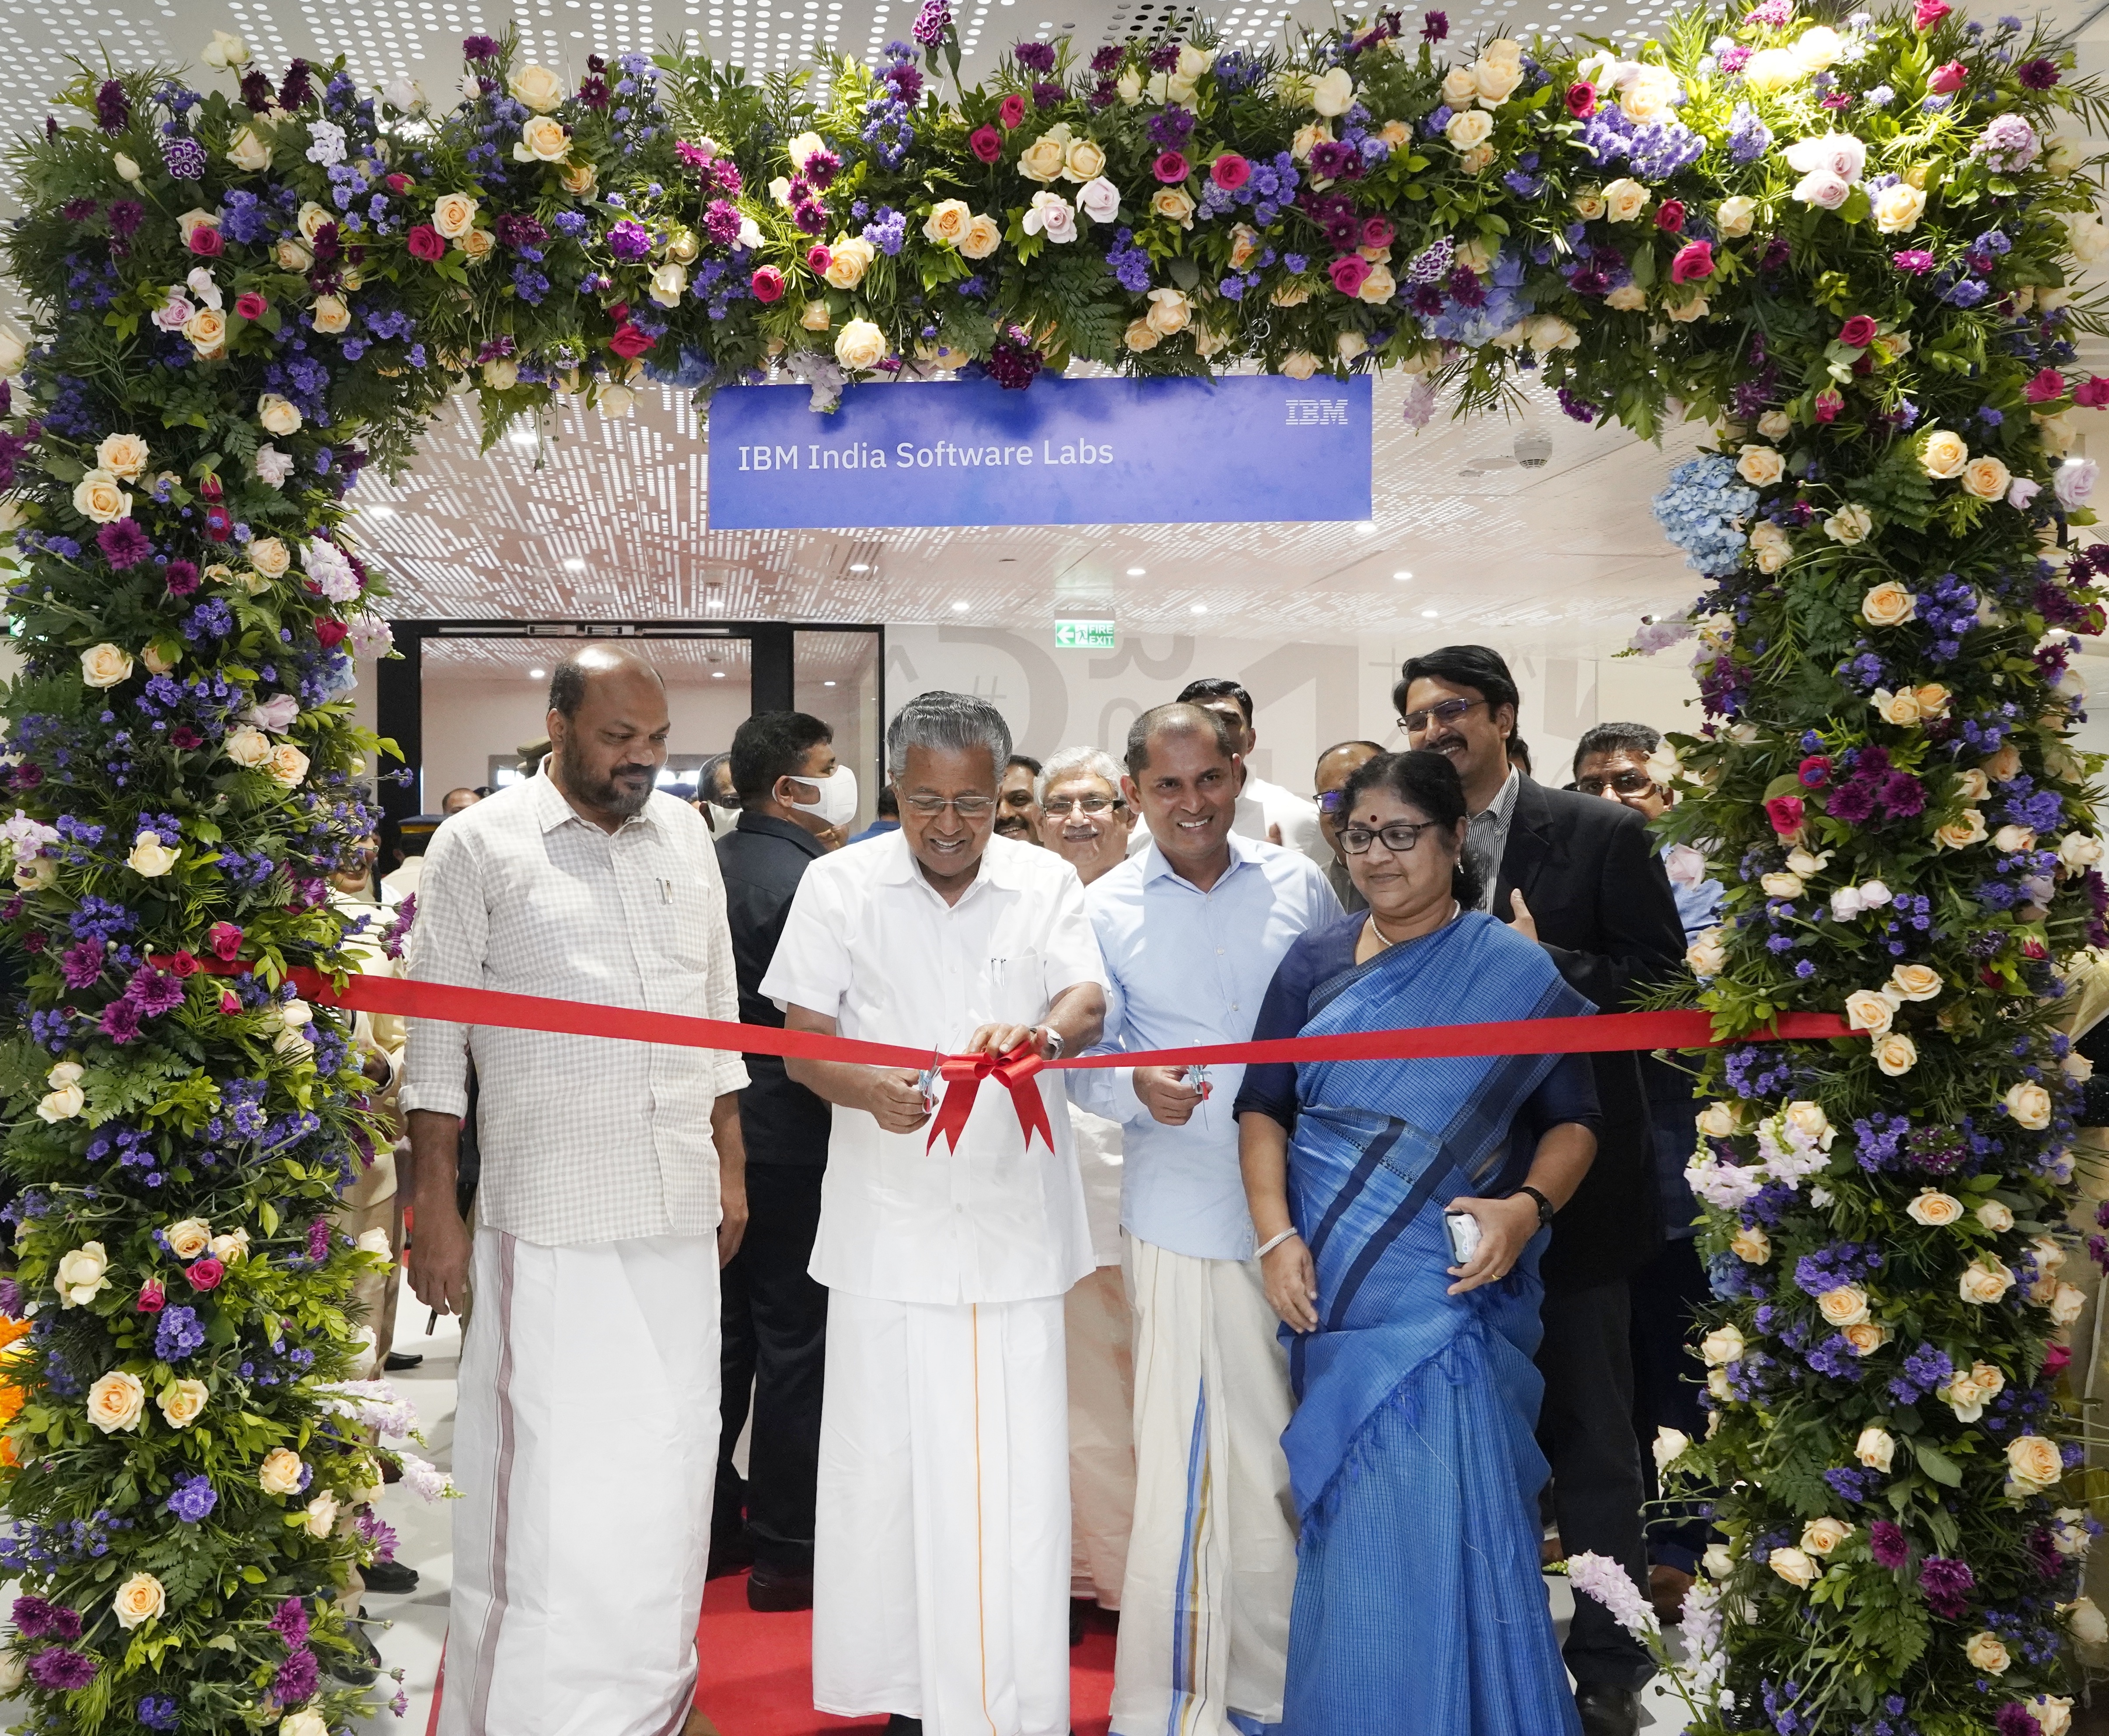 IBM inaugurates its new Software Lab in Kochi to accelerate digital innovation and automation product development